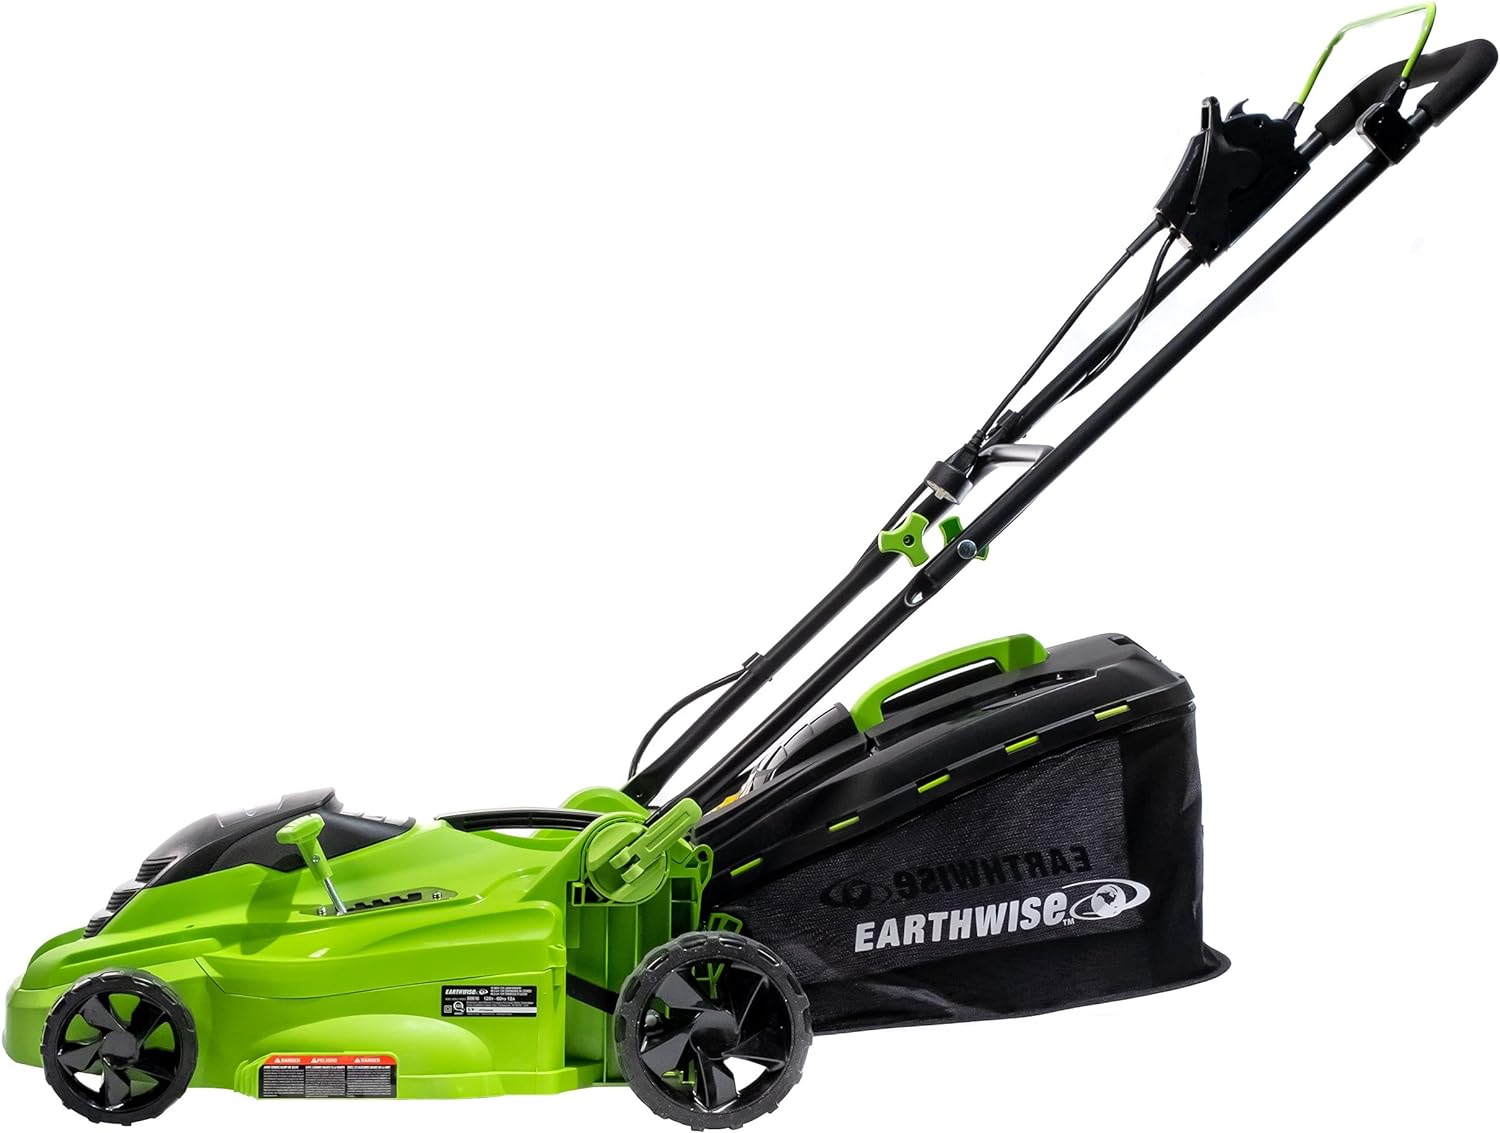 Earthwise 16-Inch 11-Amp Corded Electric Walk-Behind Lawn Mower 16-Inch, 11-Amp